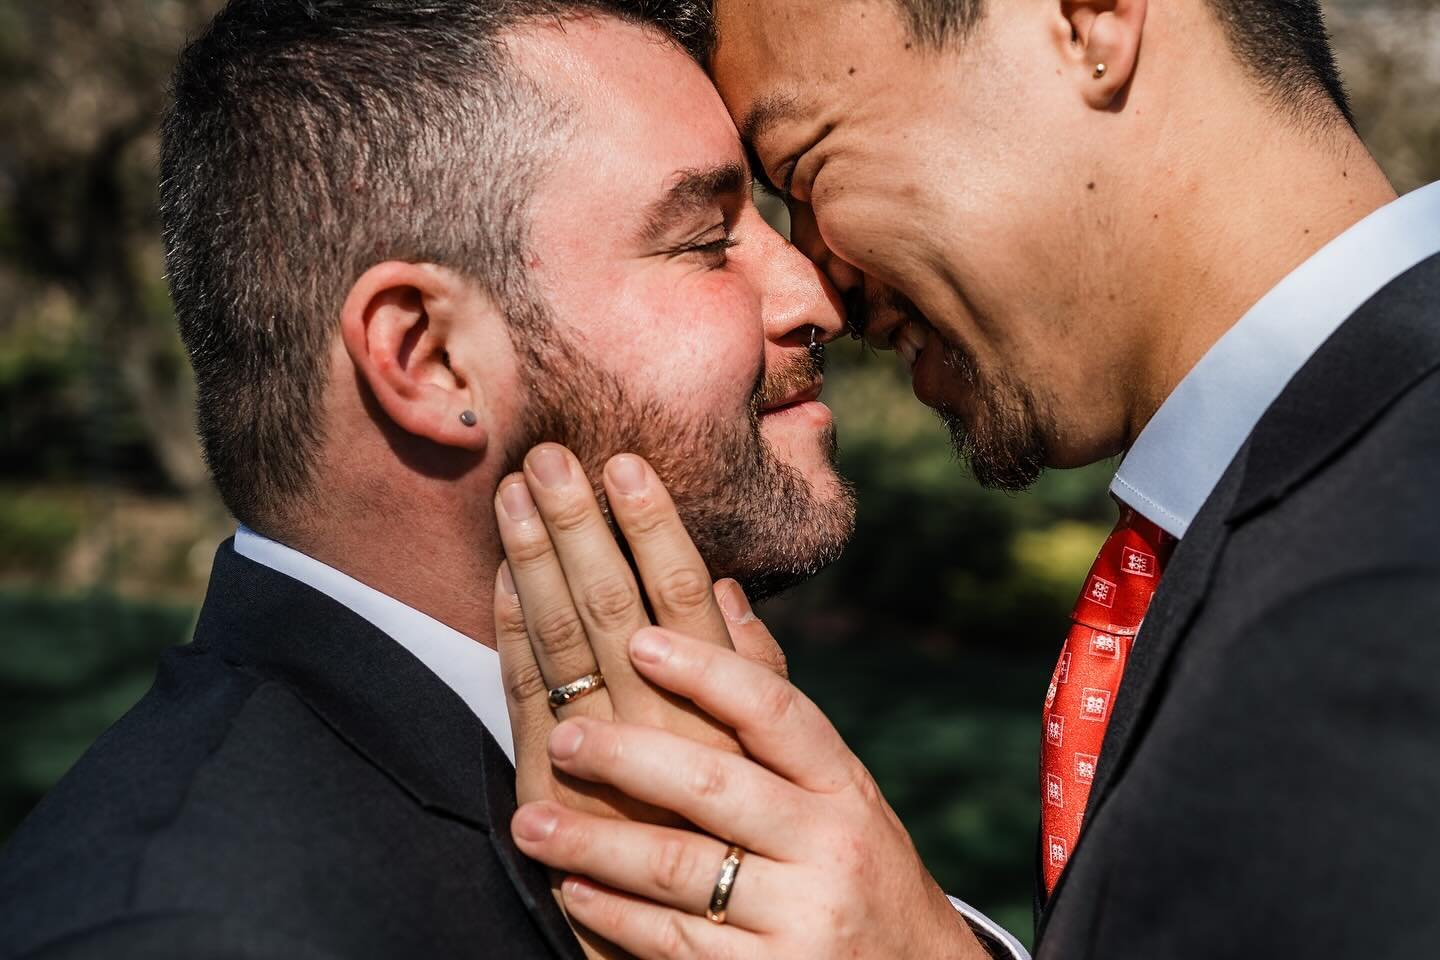 Feeling truly privileged to have been part of David and Rob&rsquo;s beautiful wedding day, where every moment radiated love and authenticity. Surrounded by an intimate gathering of their closest friends and family, they exchanged vows that echoed the